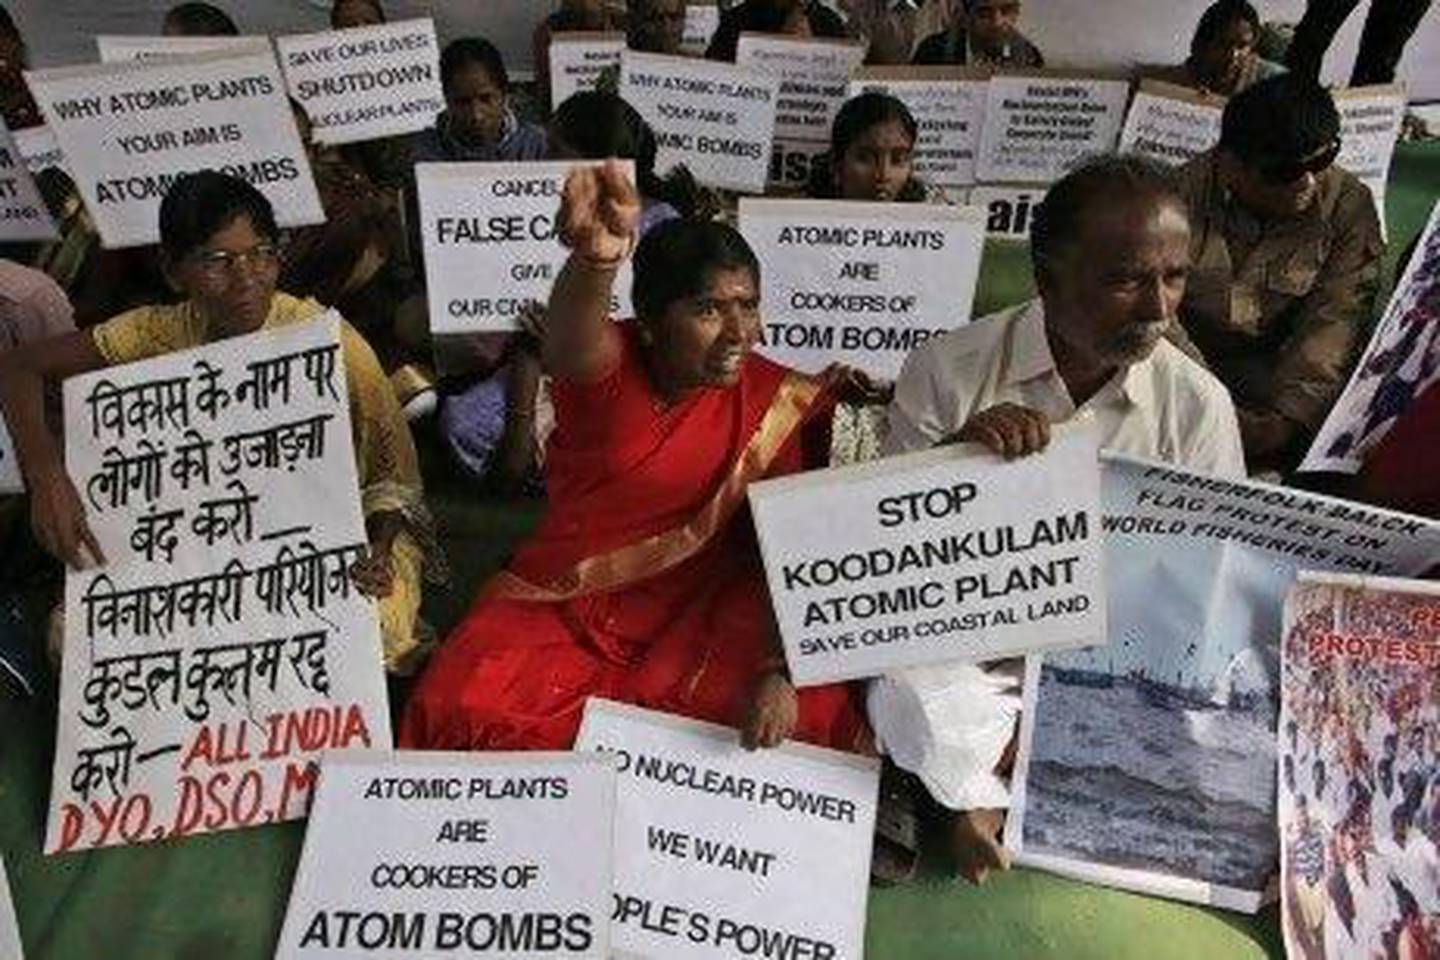 
People living near nuclear Kudankulam nuclear power plant site in south India protesting in New Delhi.
